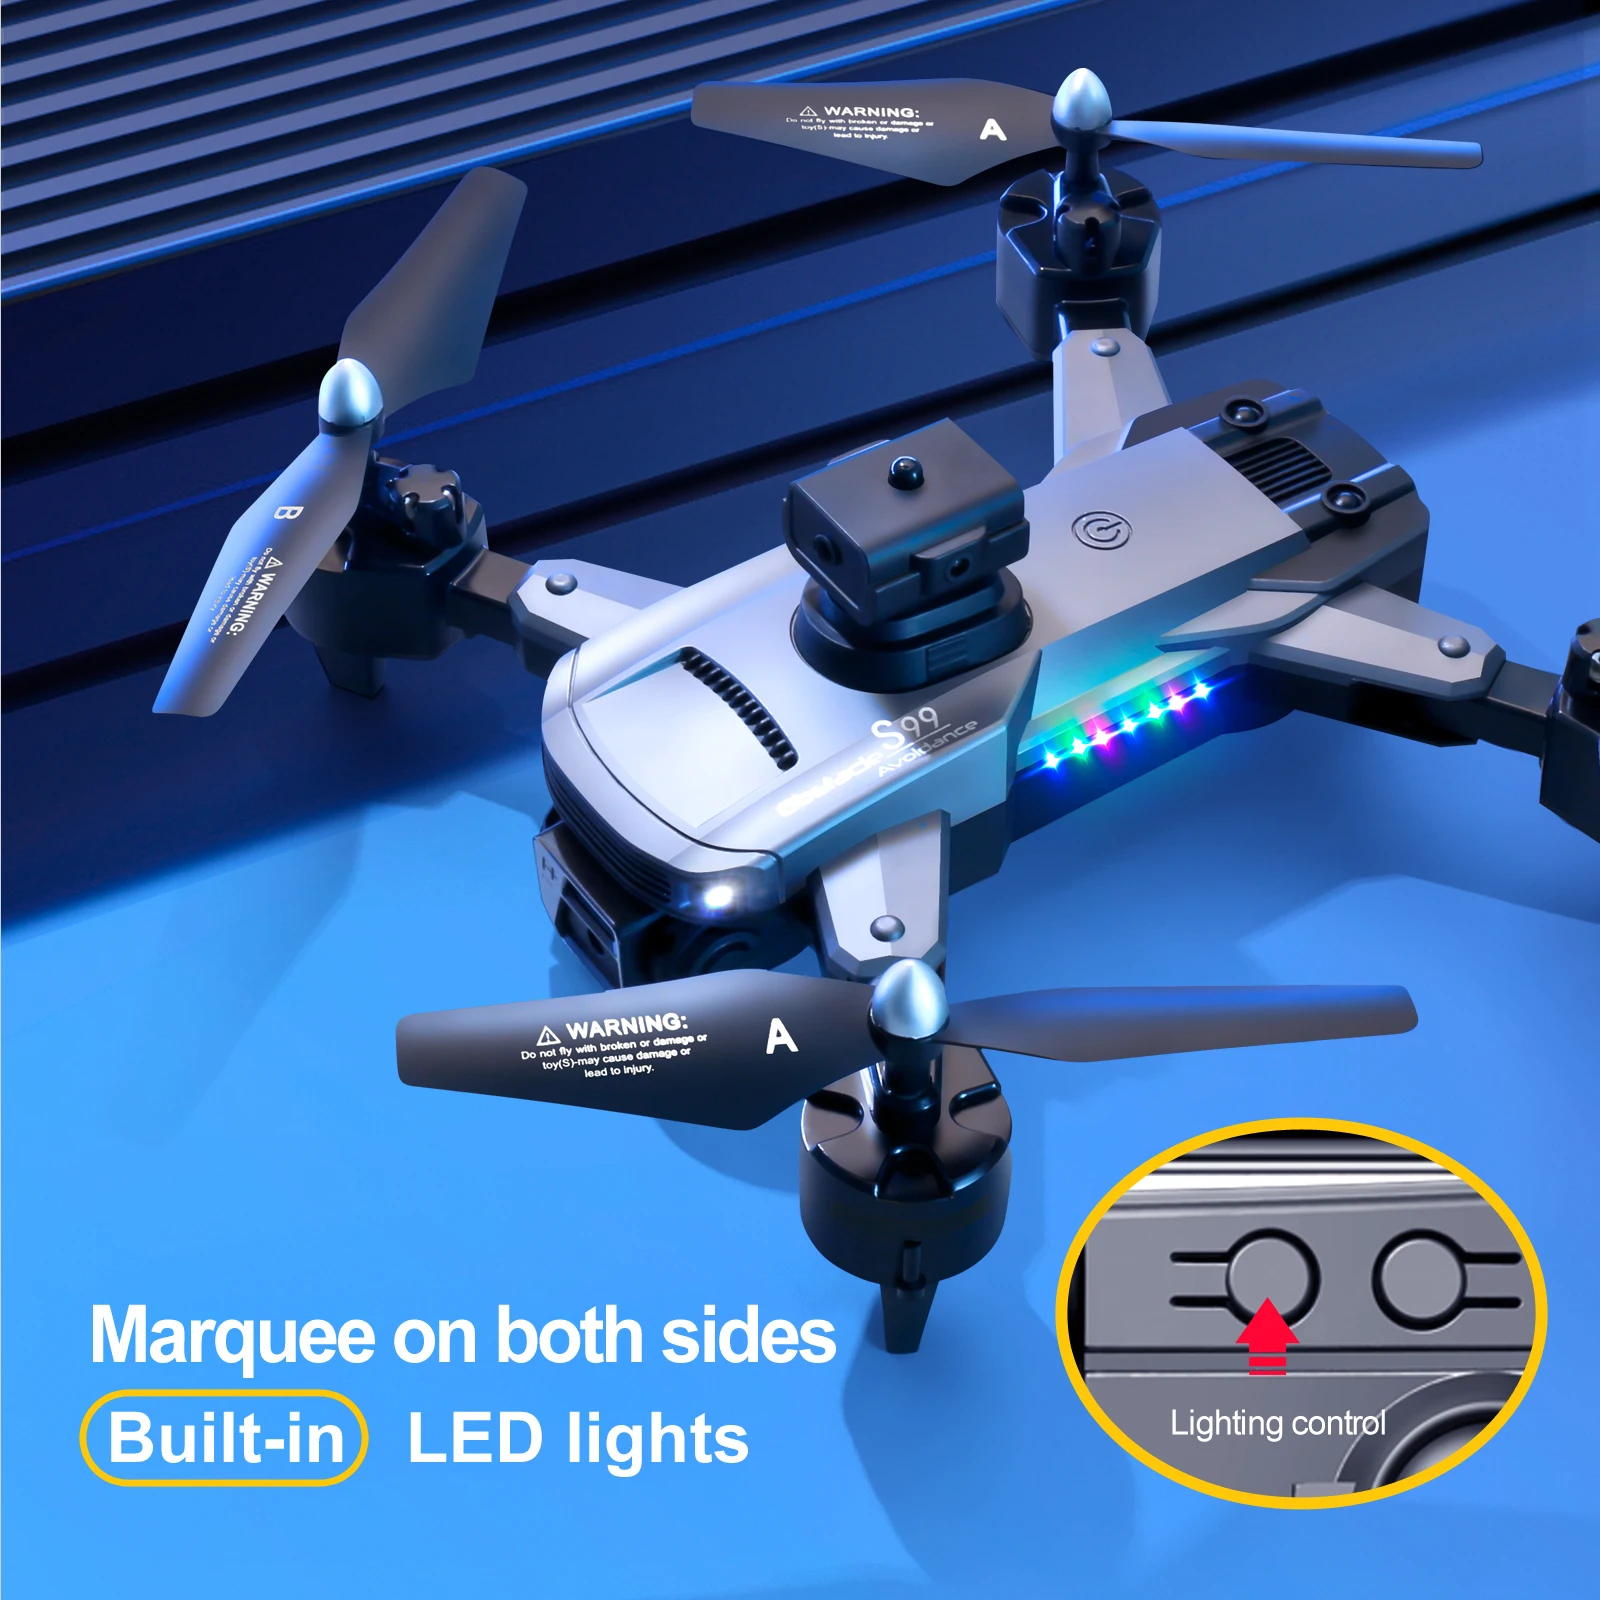 tage ned Furnace Pløje S99 Drone 4K Profession Obstacle Avoidance Dual Camera RC Quadcopter Drone  FPV 2.4G WIFI Light Remote Control Helicopter Toys _ - AliExpress Mobile